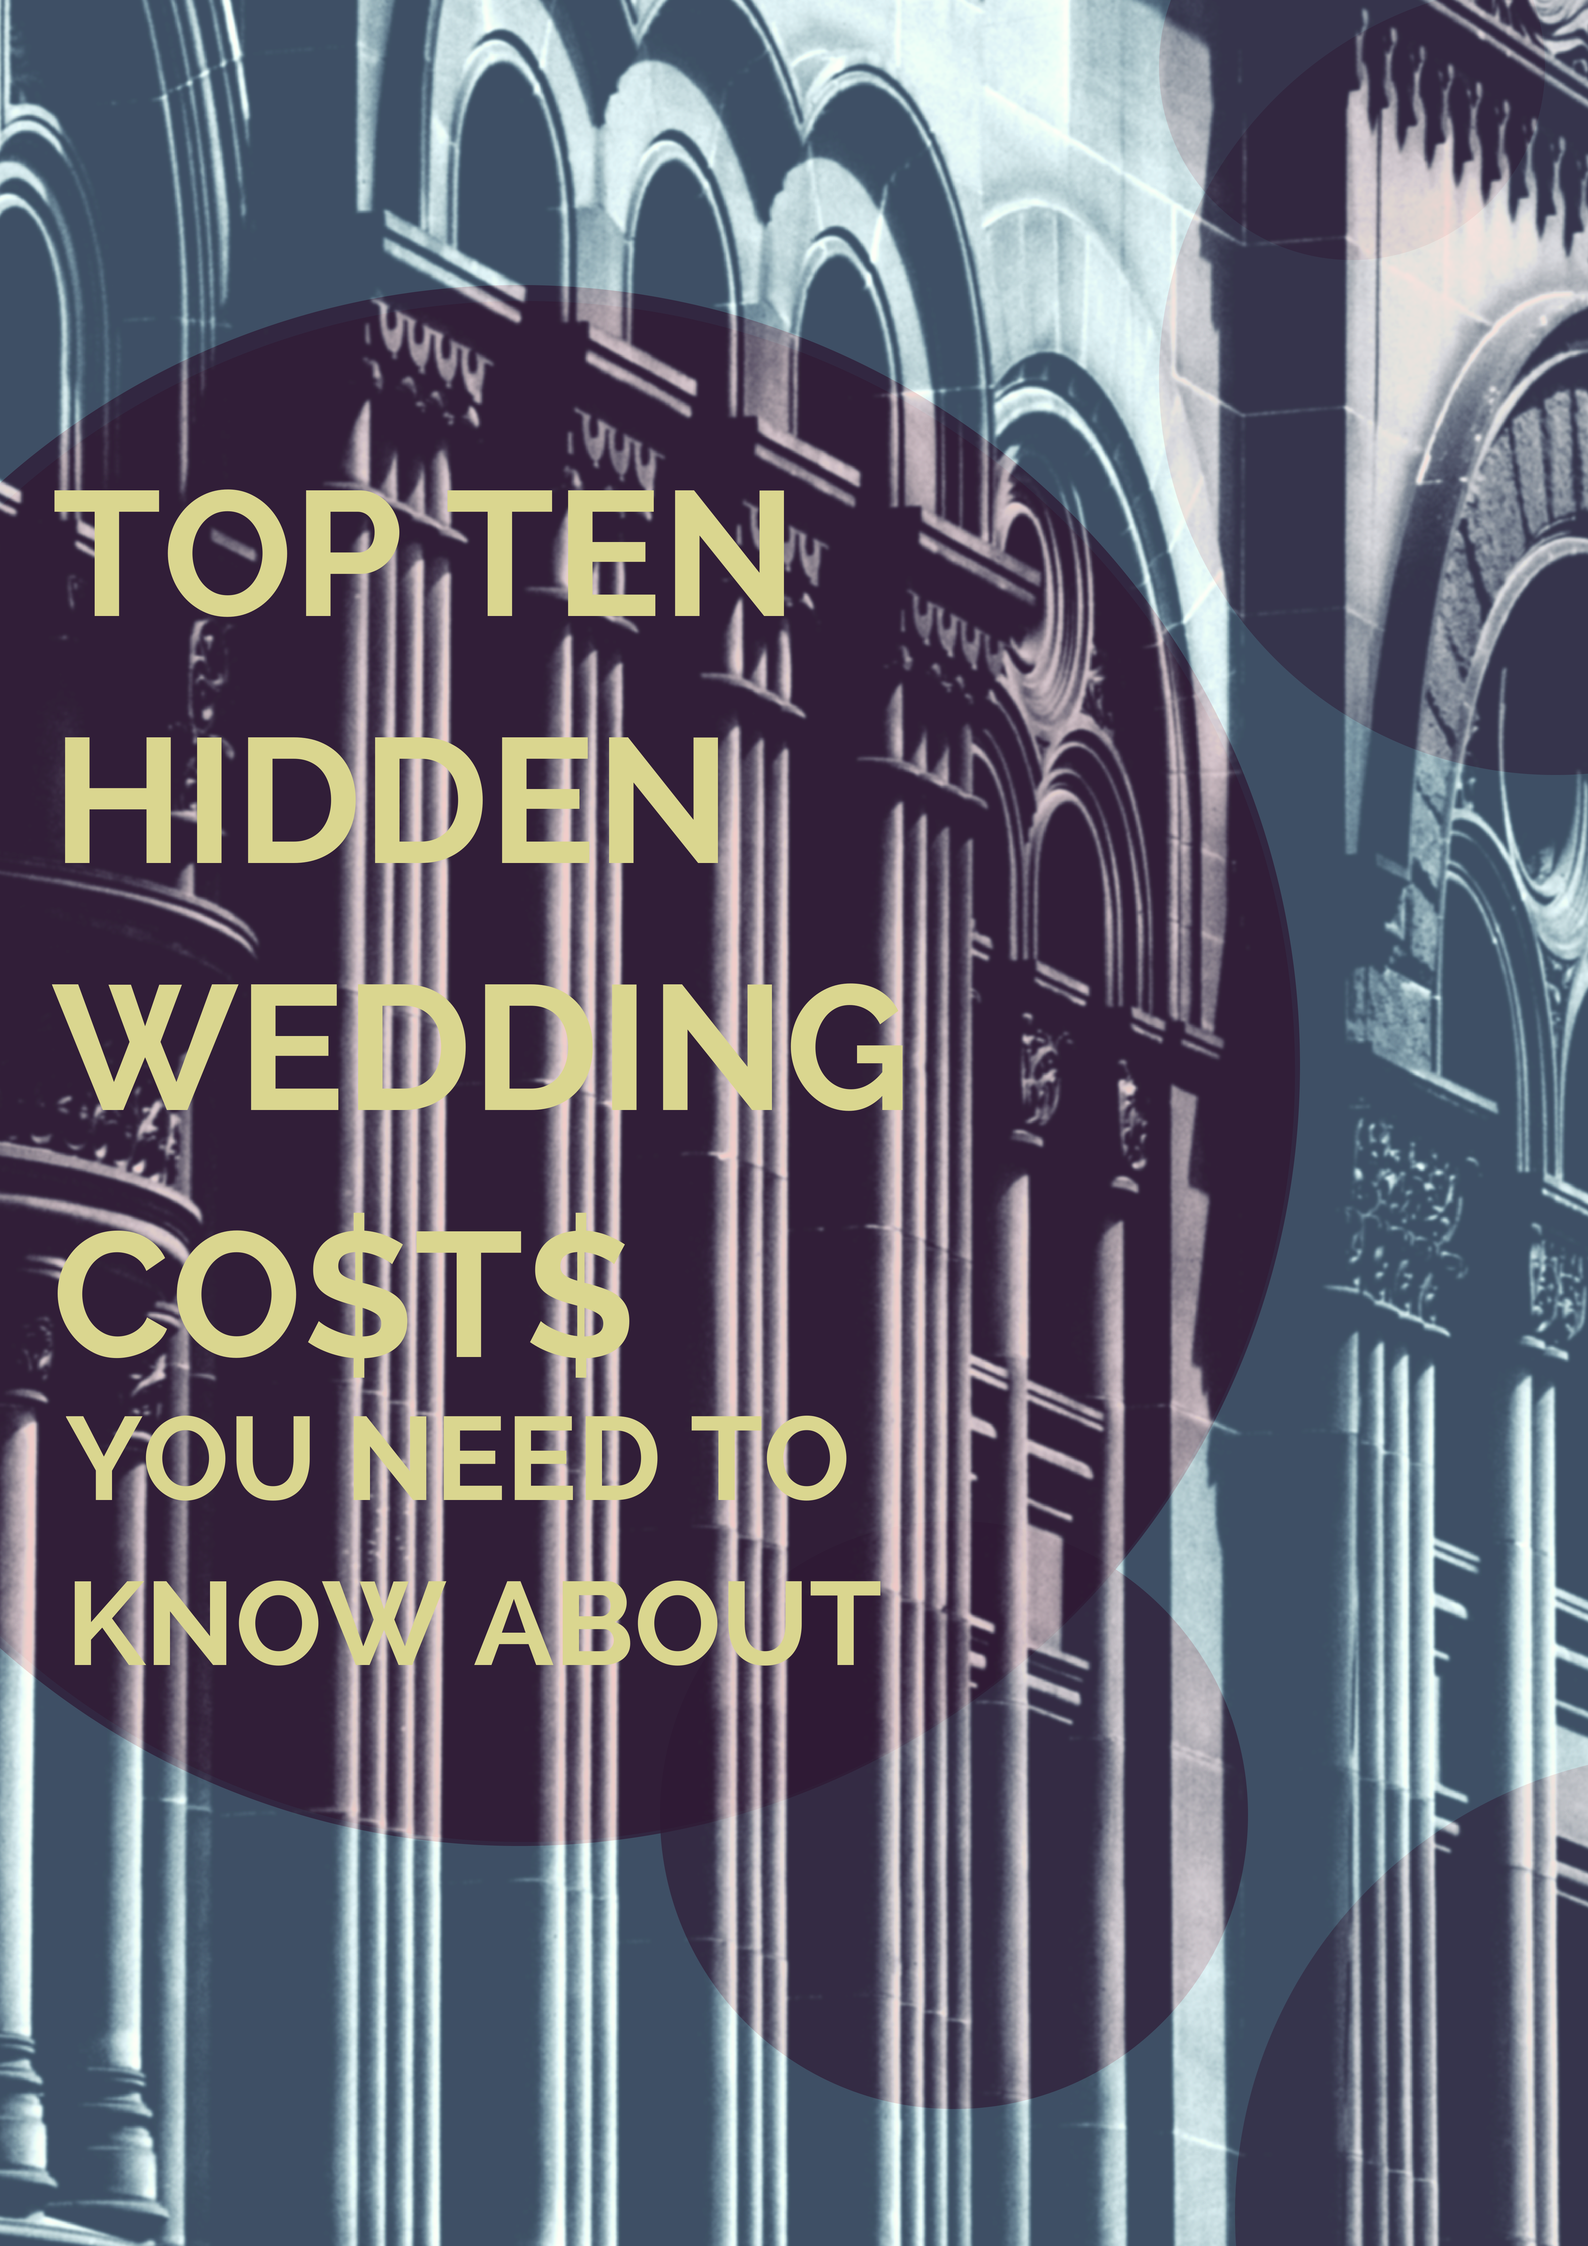 Top Ten Hidden Wedding Costs You Need To Know About